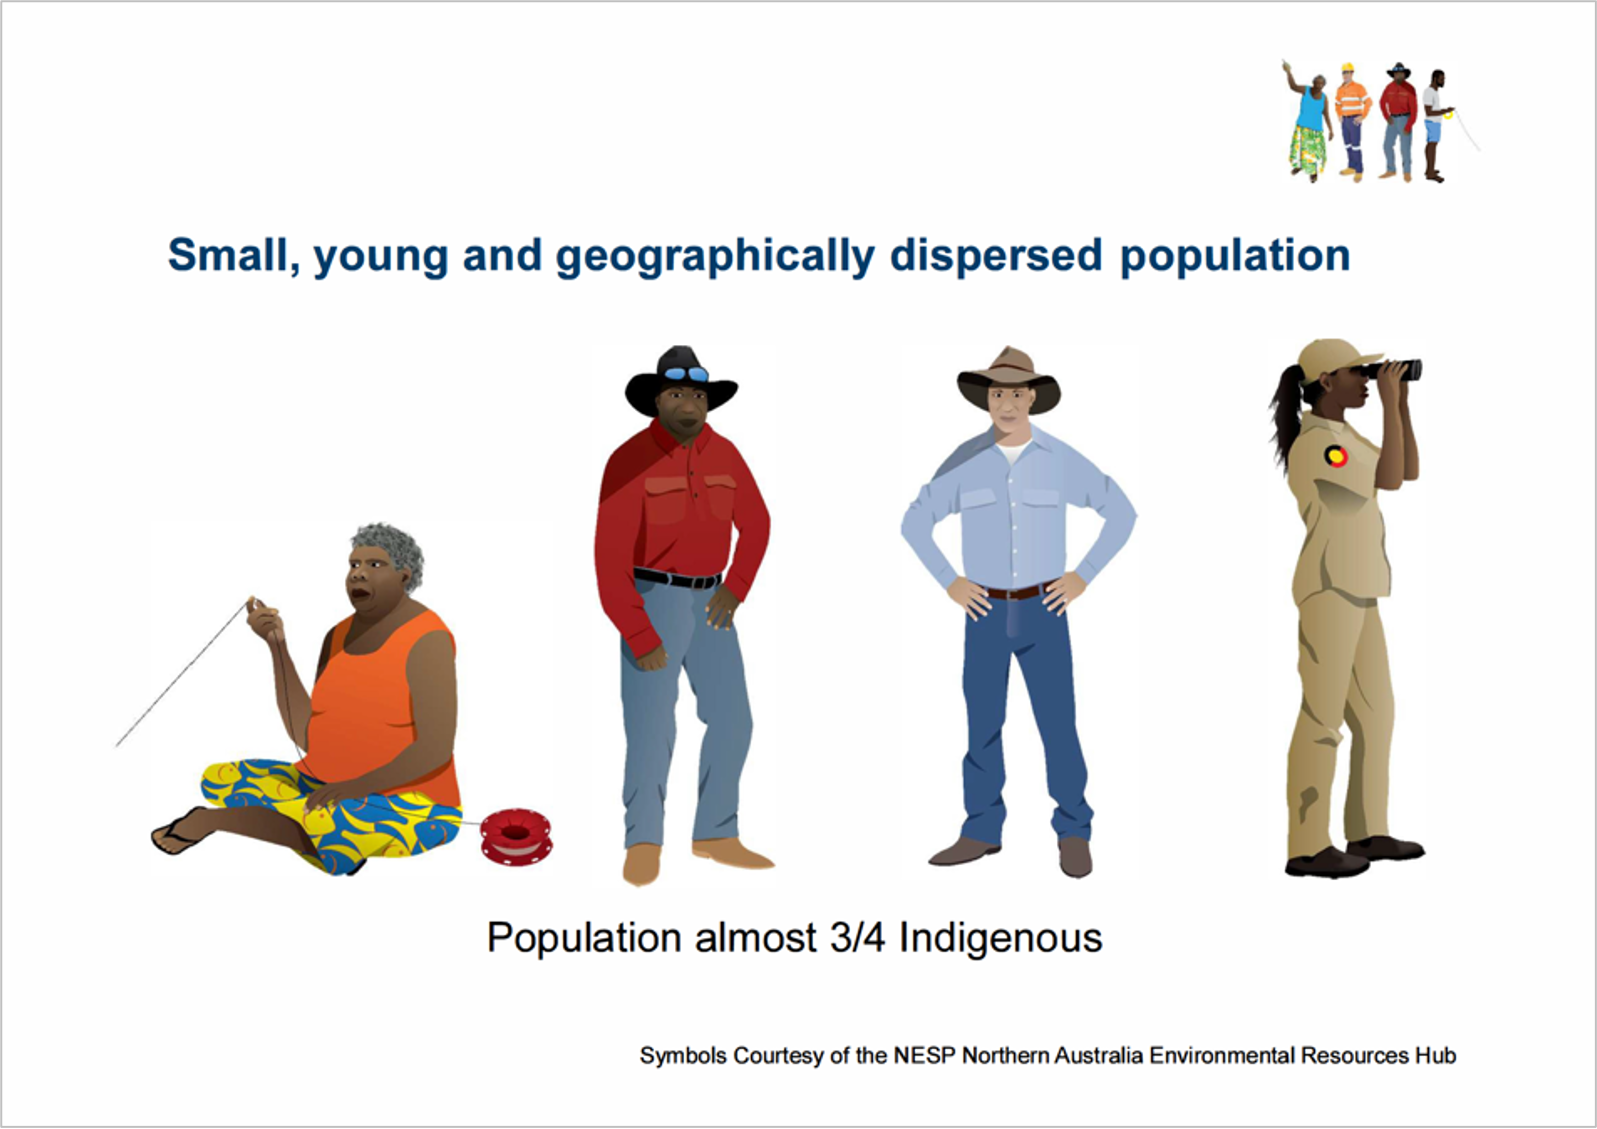 A slide from a Western Australian government presentation which shows four symbols better depicting the 75% of the Kimberley population that is Indigenous.